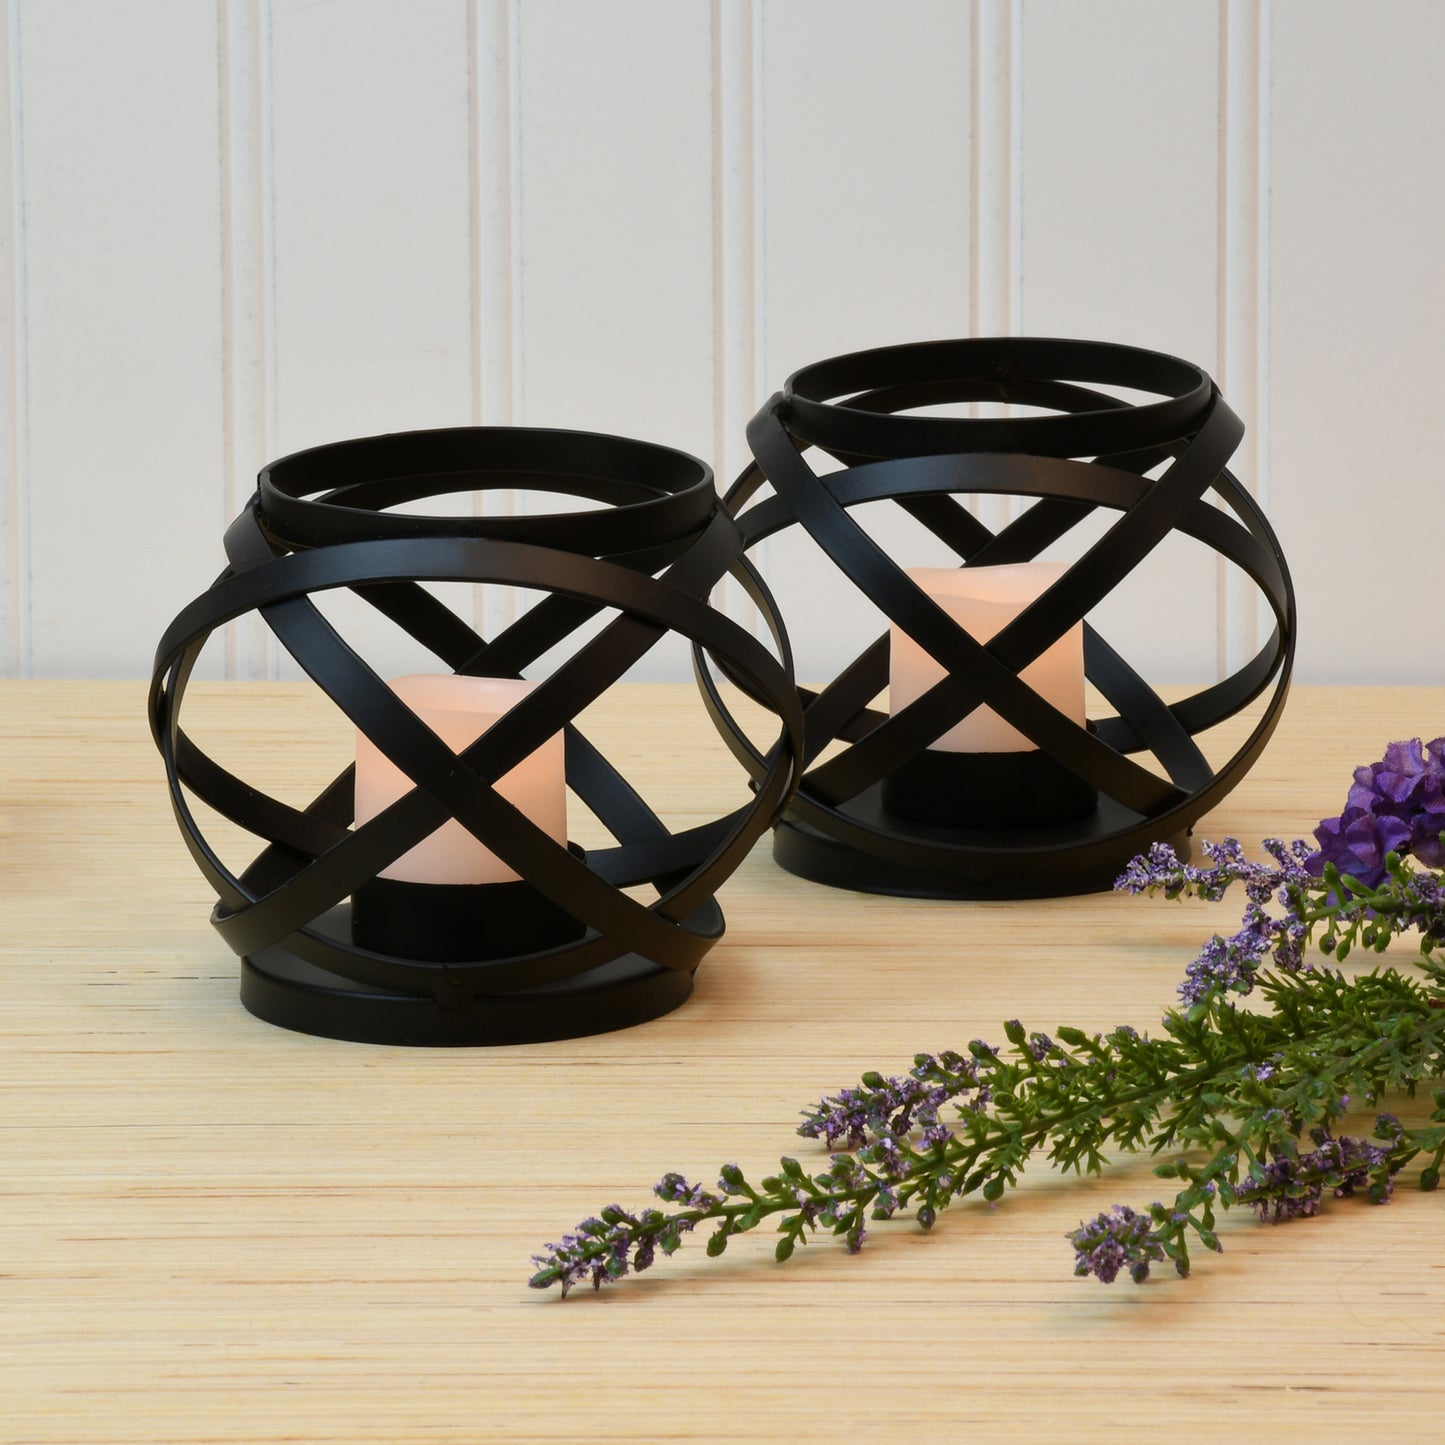 Metal Candleholders with Battery Operated LED Candles - Set of 2